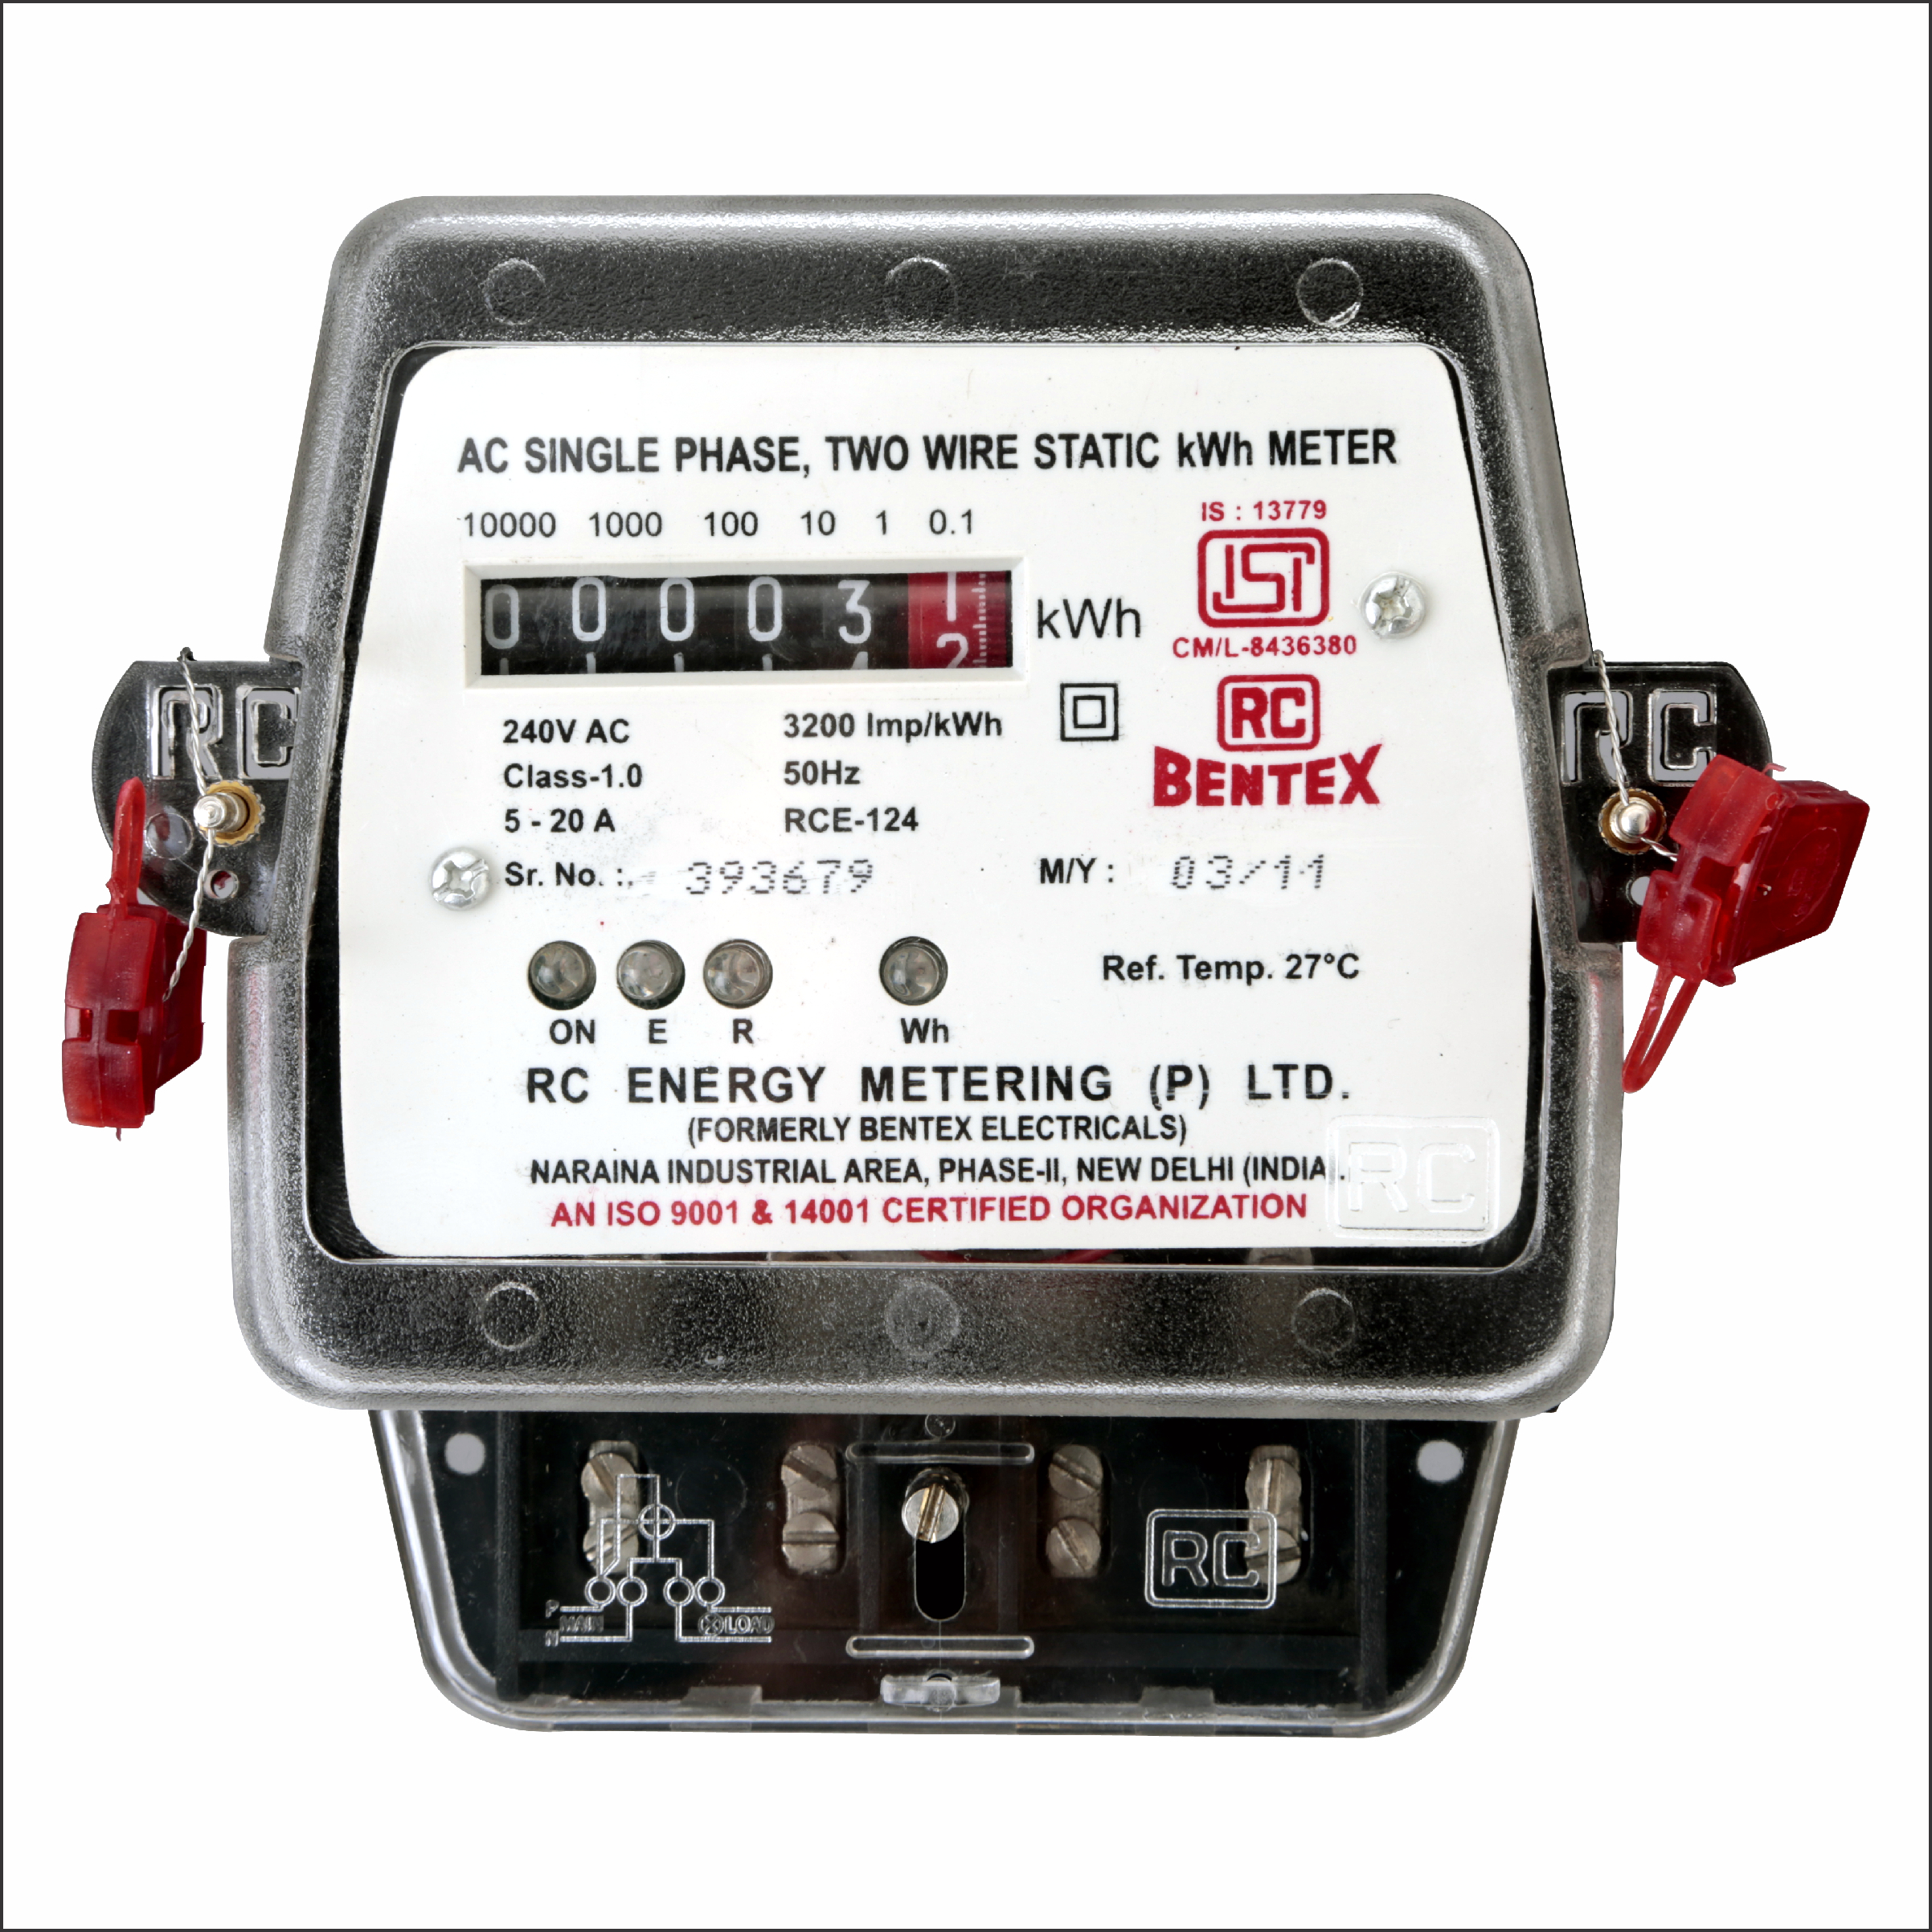 RC Bentex 5 - 20 A Single Phase Counter Energy Meters_0